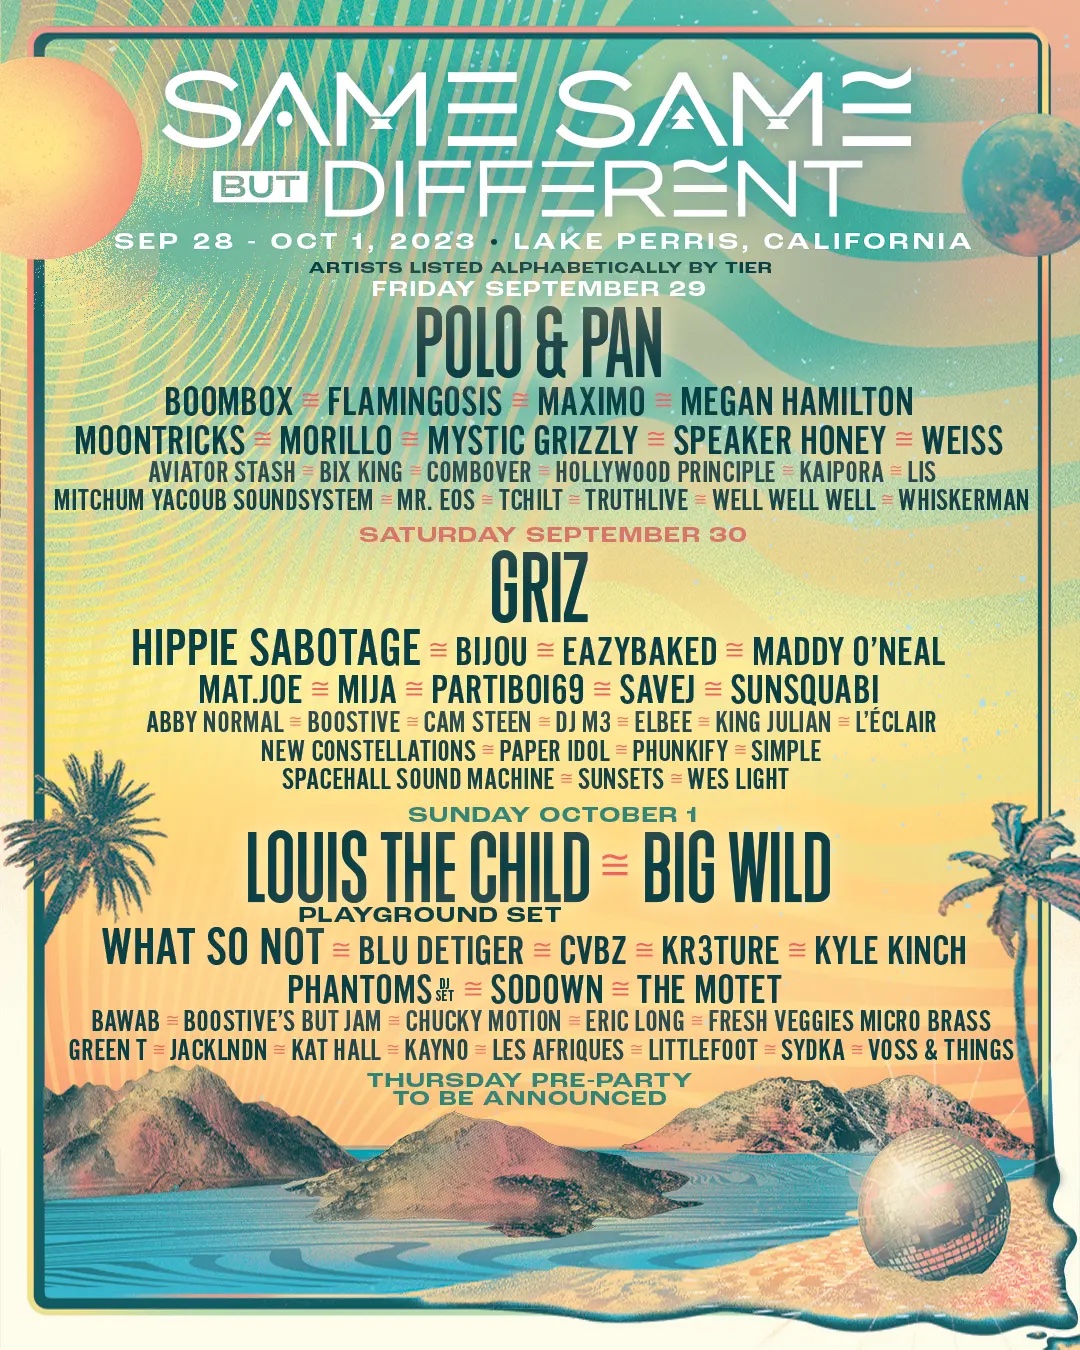 Same Same But Different Festival lineup poster